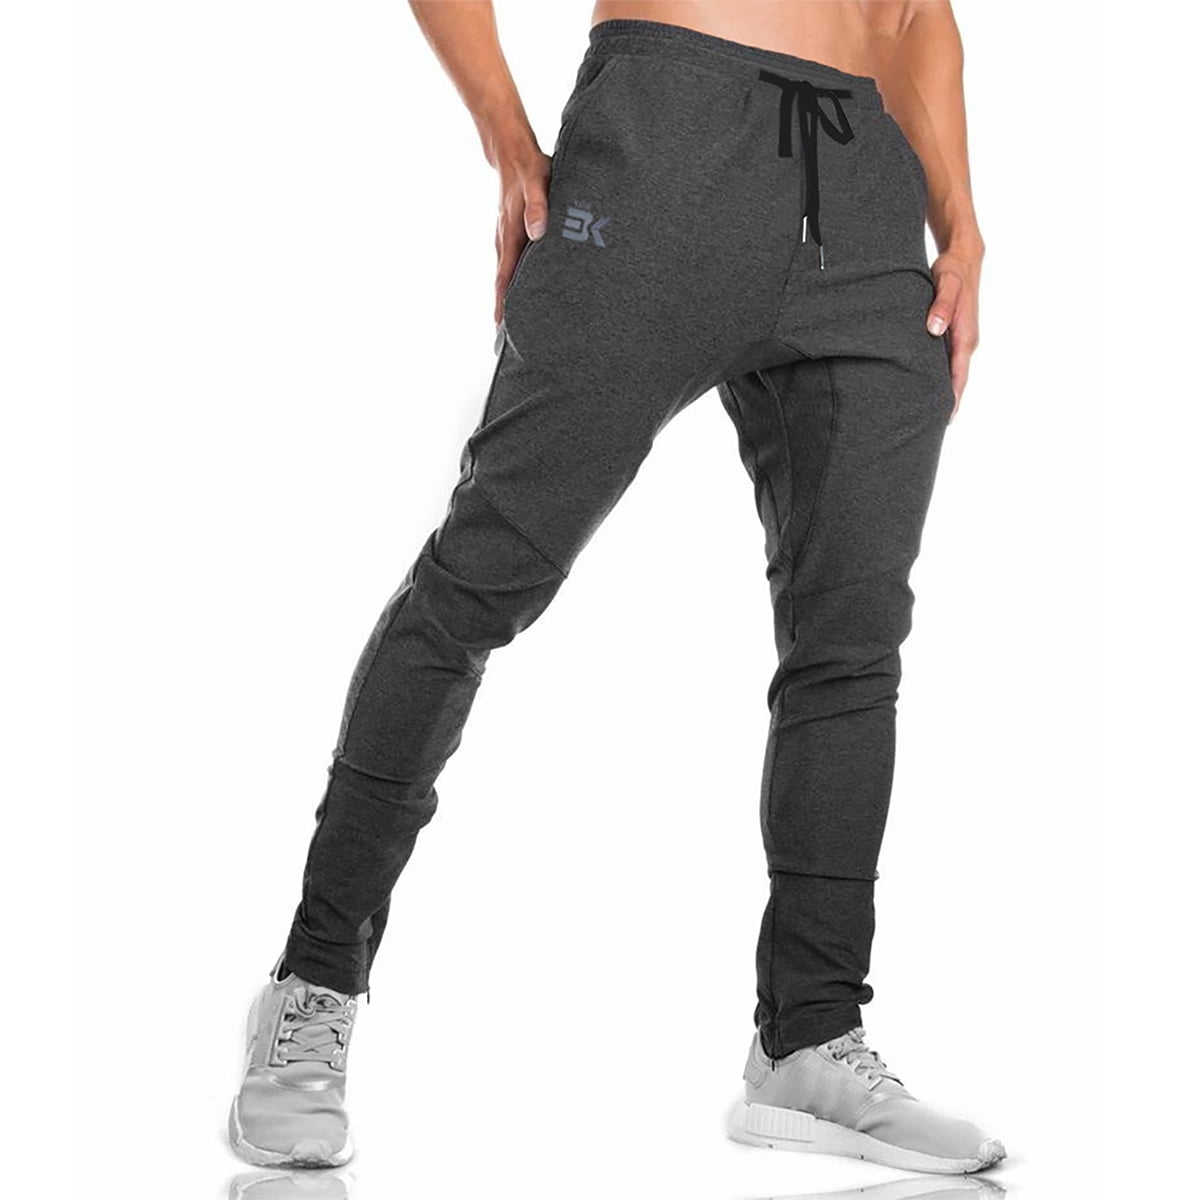 BROKIG Mens Joggers Sport Pants, Casual Gym Workout Sweatpants with ...